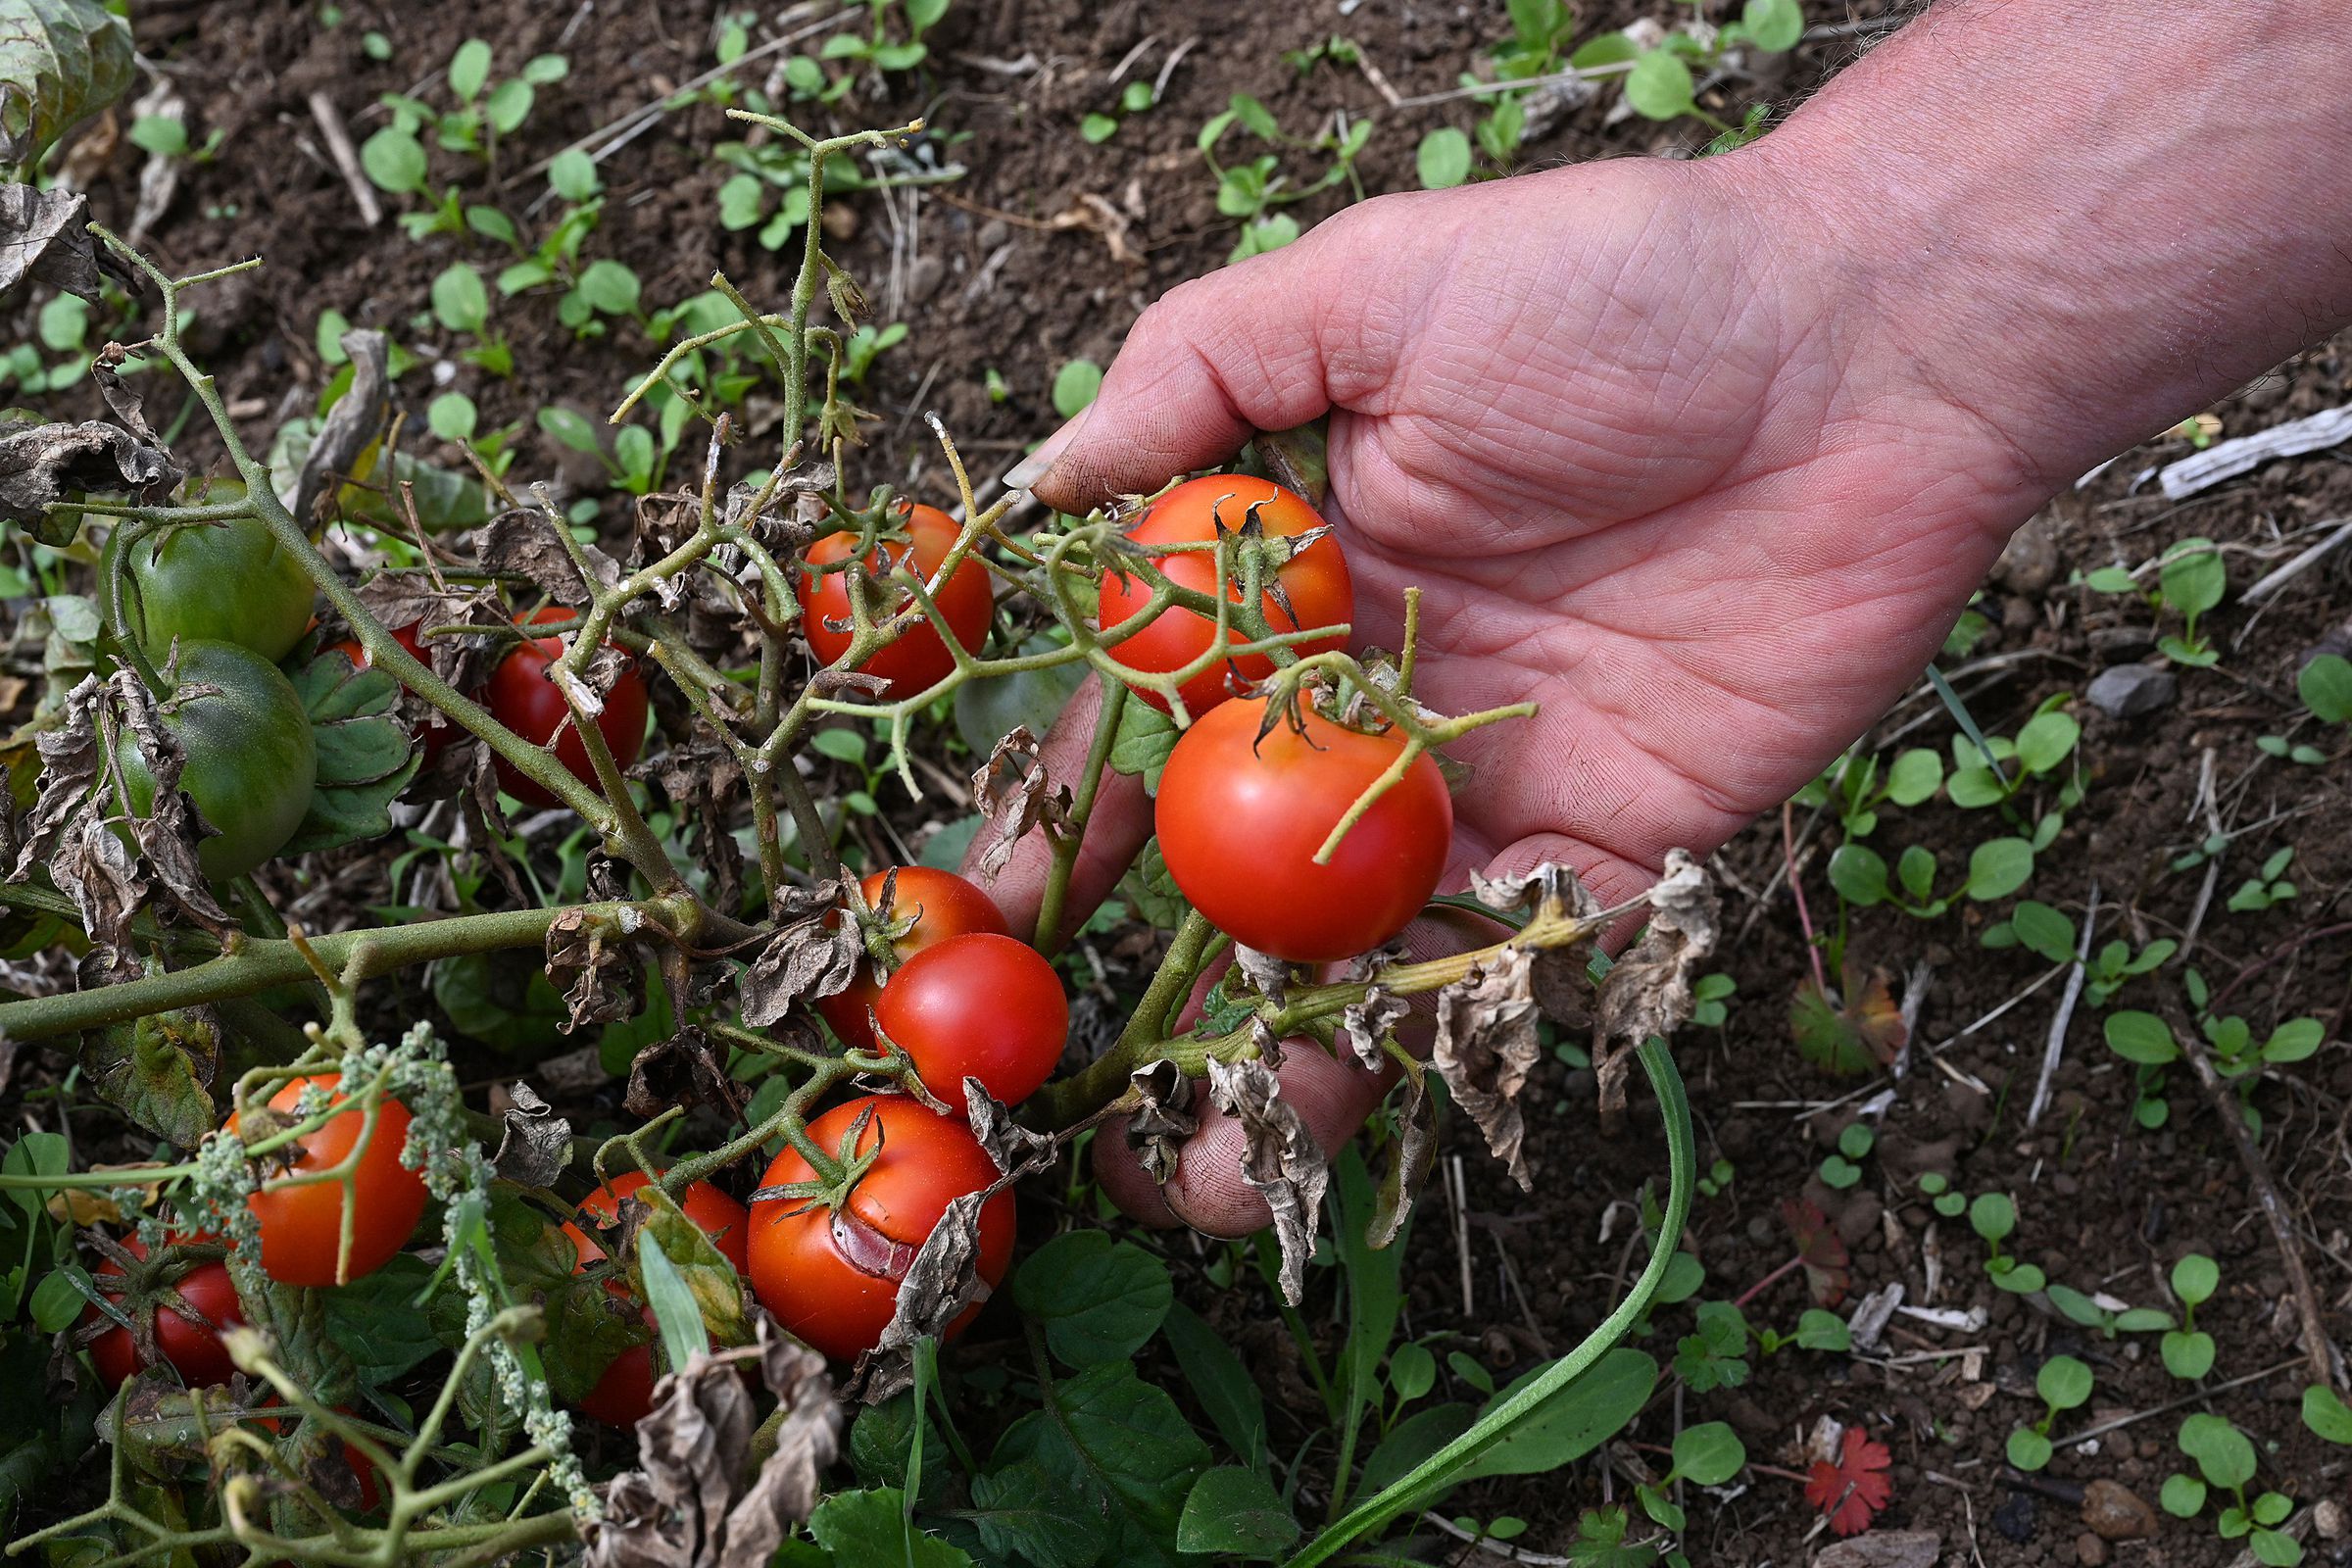 A person’s hand holds a couple small red tomatoes on a dry vine.